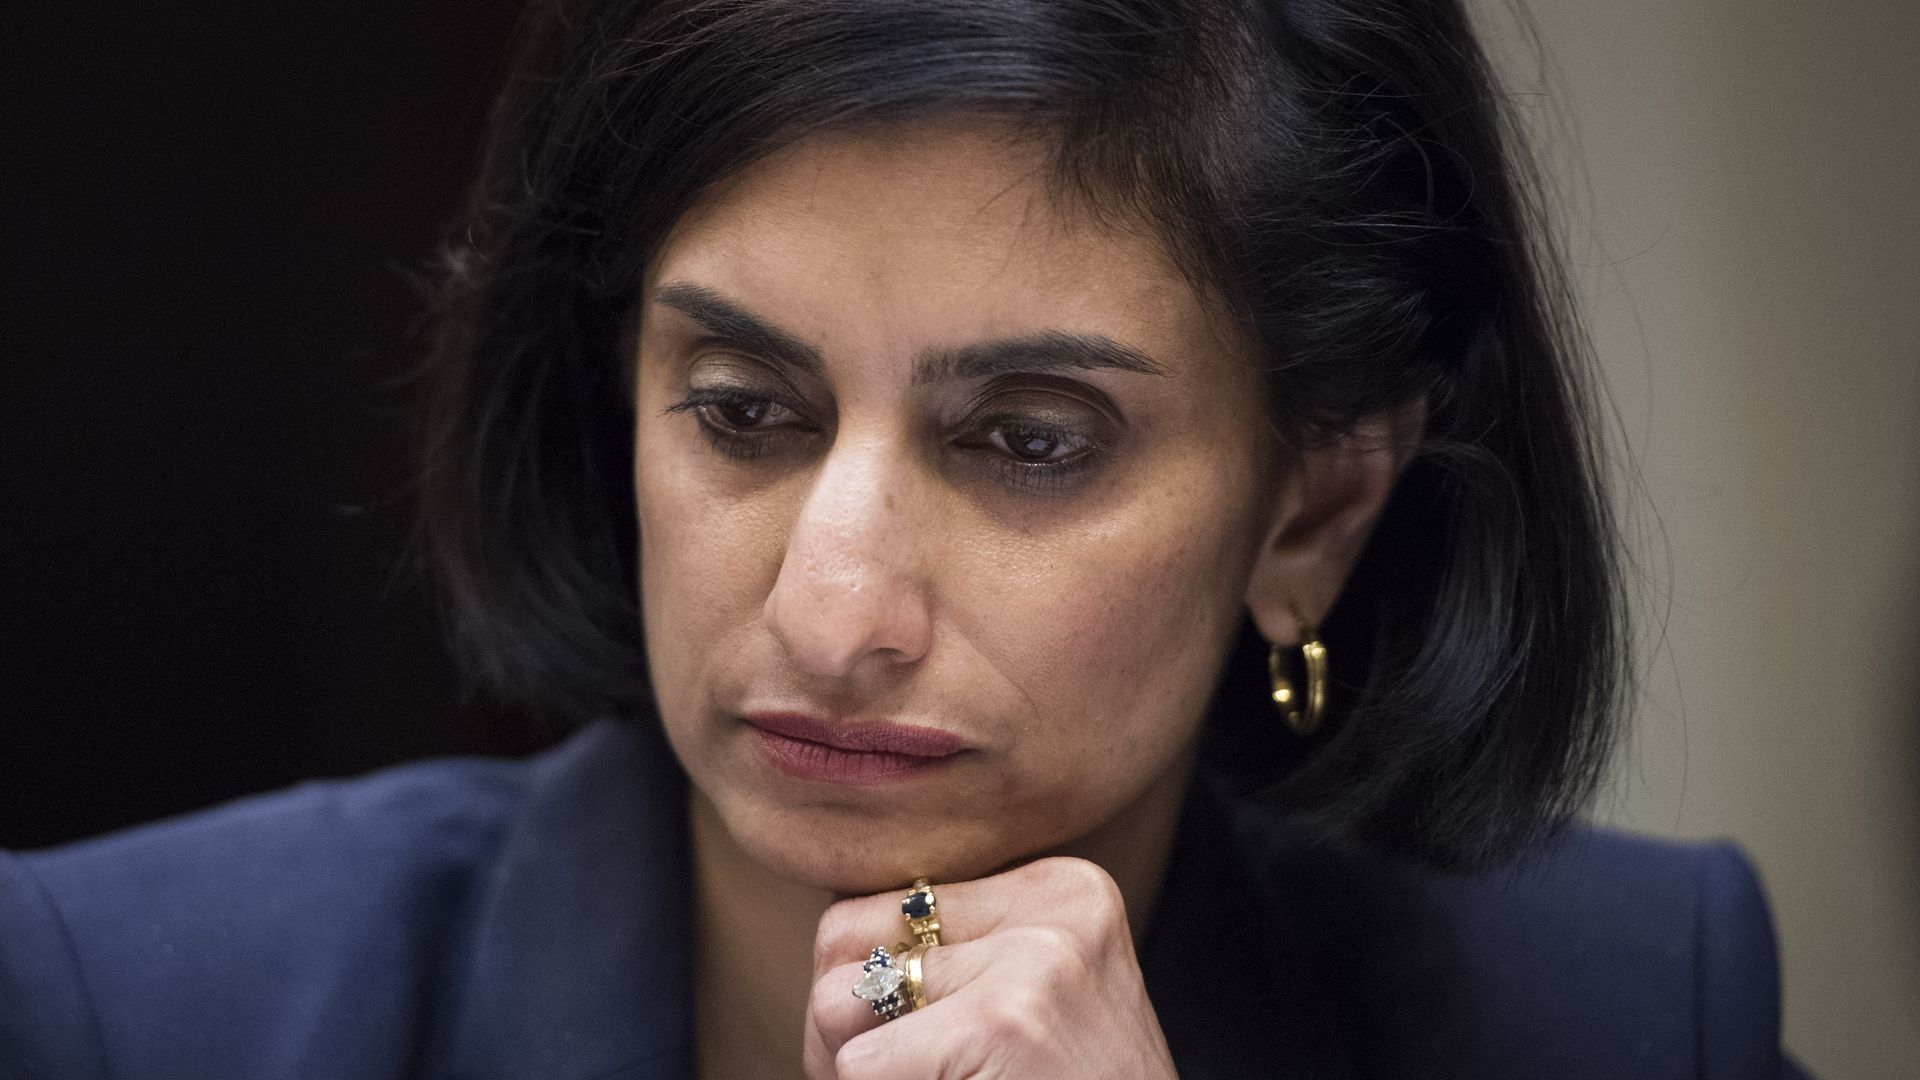 CMS Administrator Seema Verma sitting down and looking thoughtful